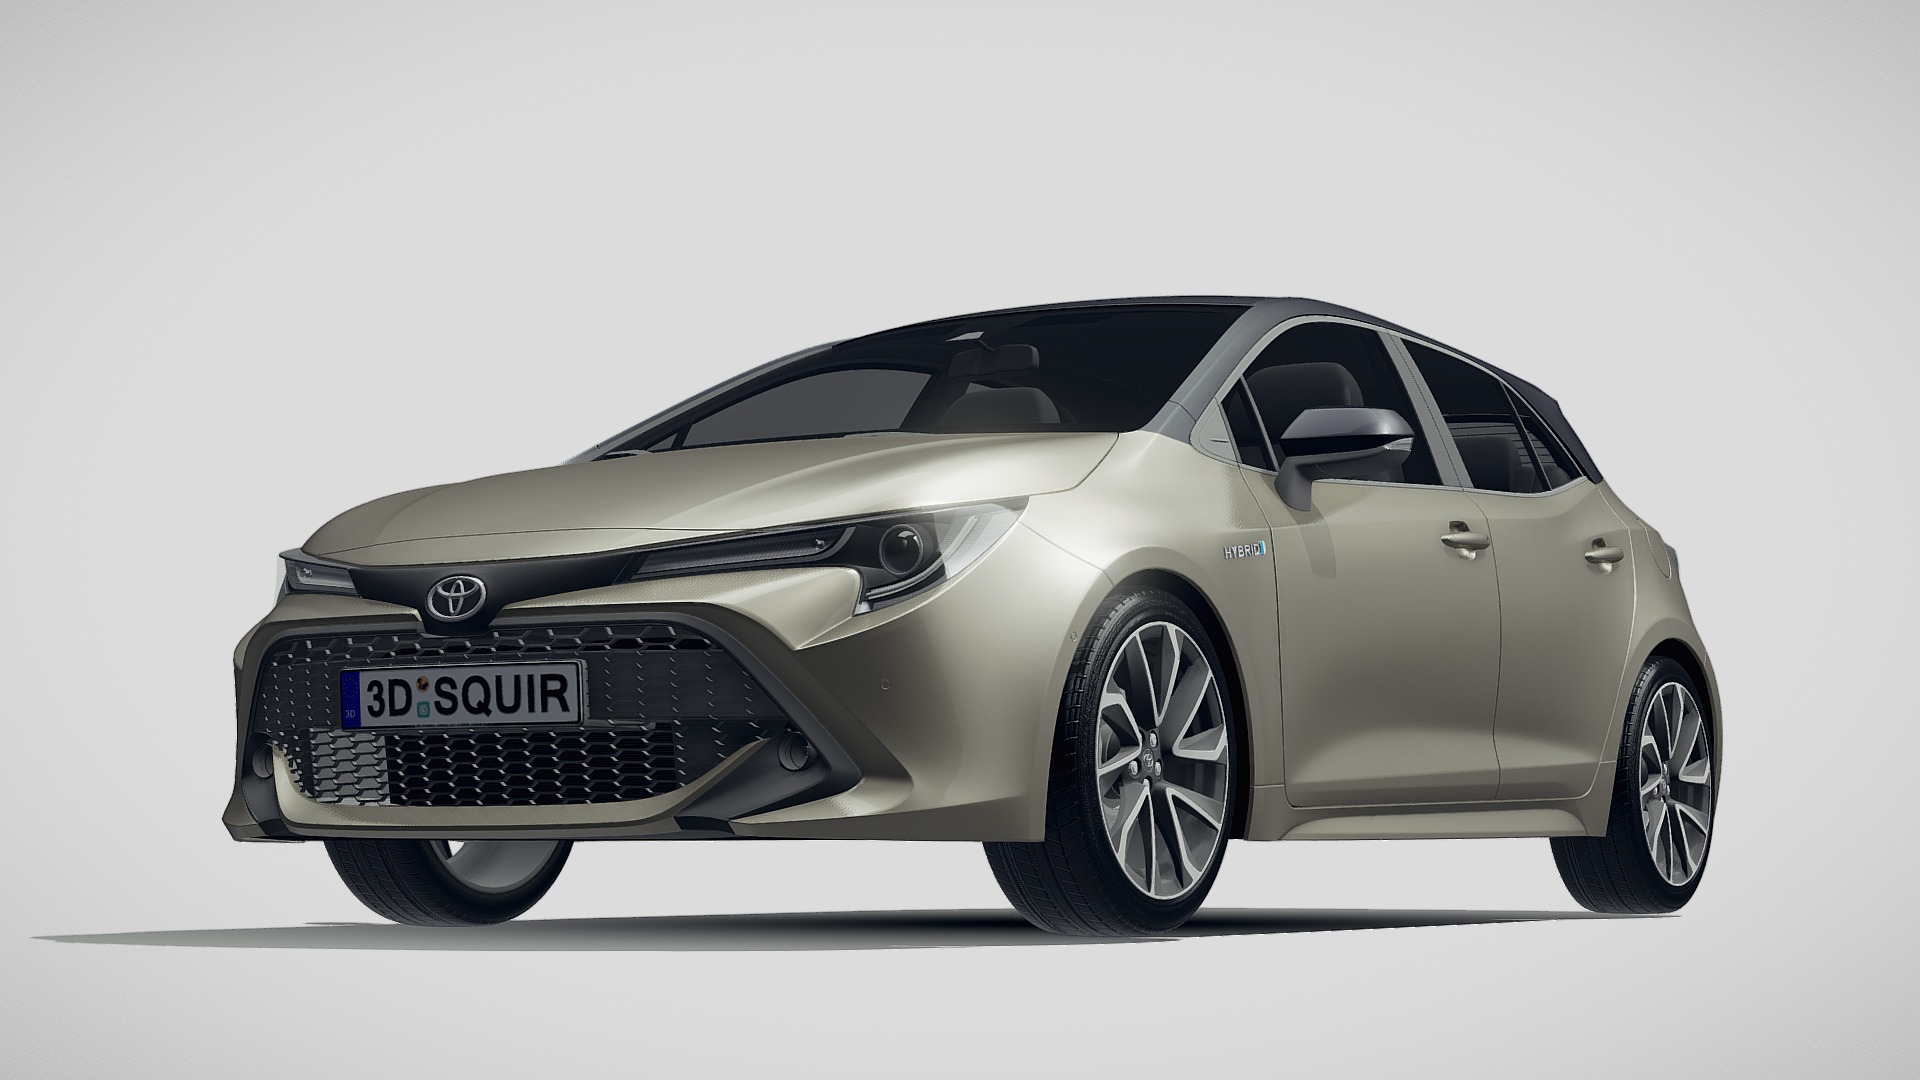 3D model Toyota Auris 2019 - This is a 3D model of the Toyota Auris 2019. The 3D model is about a silver car with a black top.